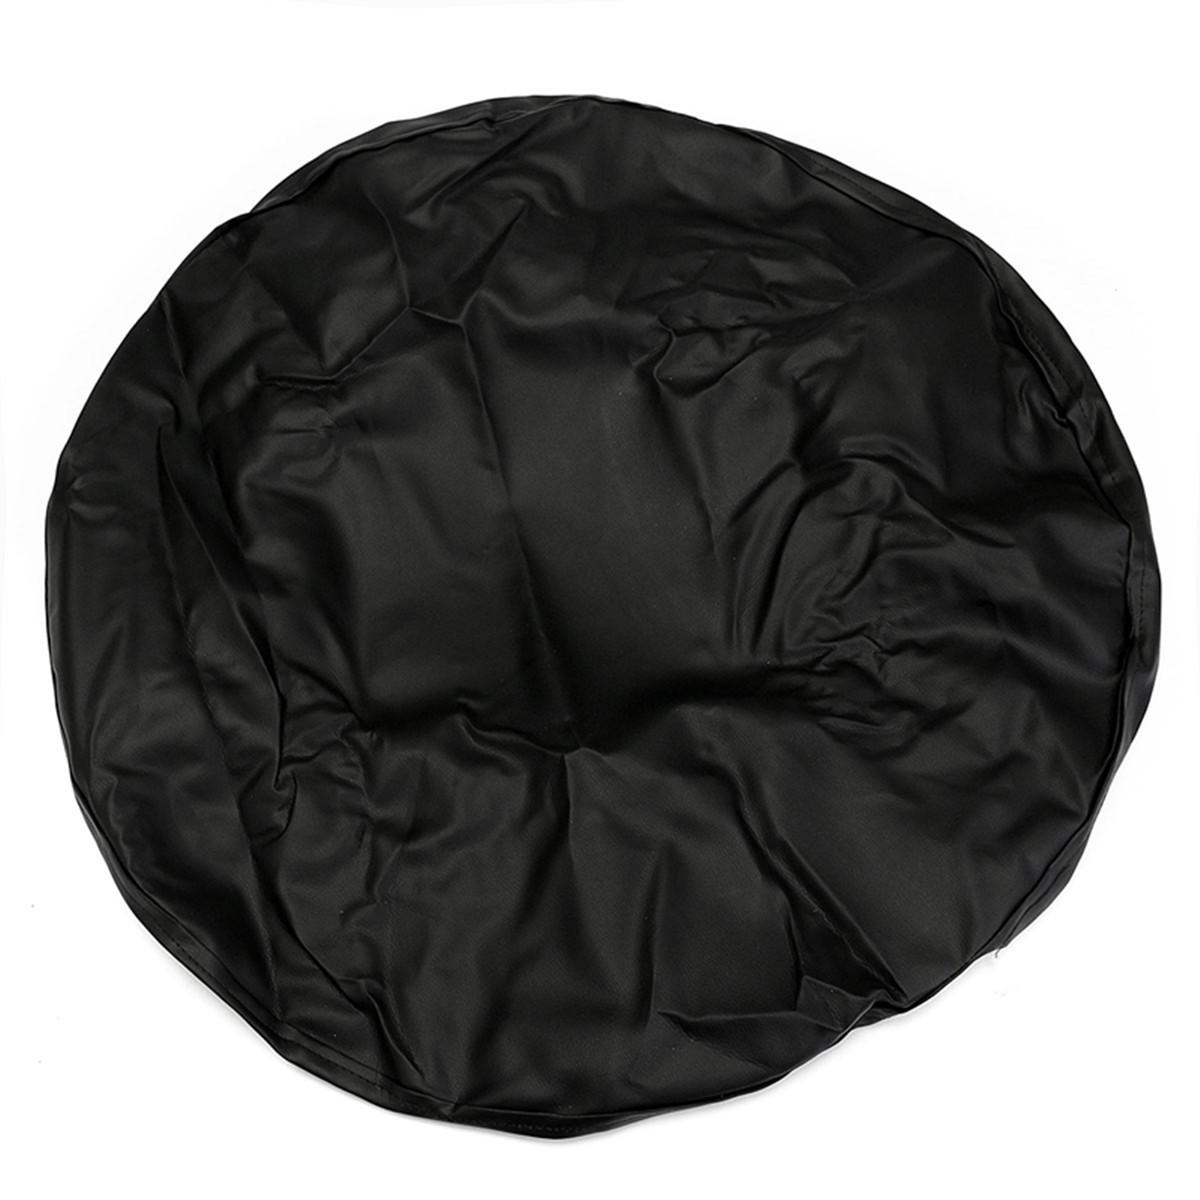 15 inch black pvc leather spare wheel tire cover waterproof size m for jeep/ wrangler/ suv car